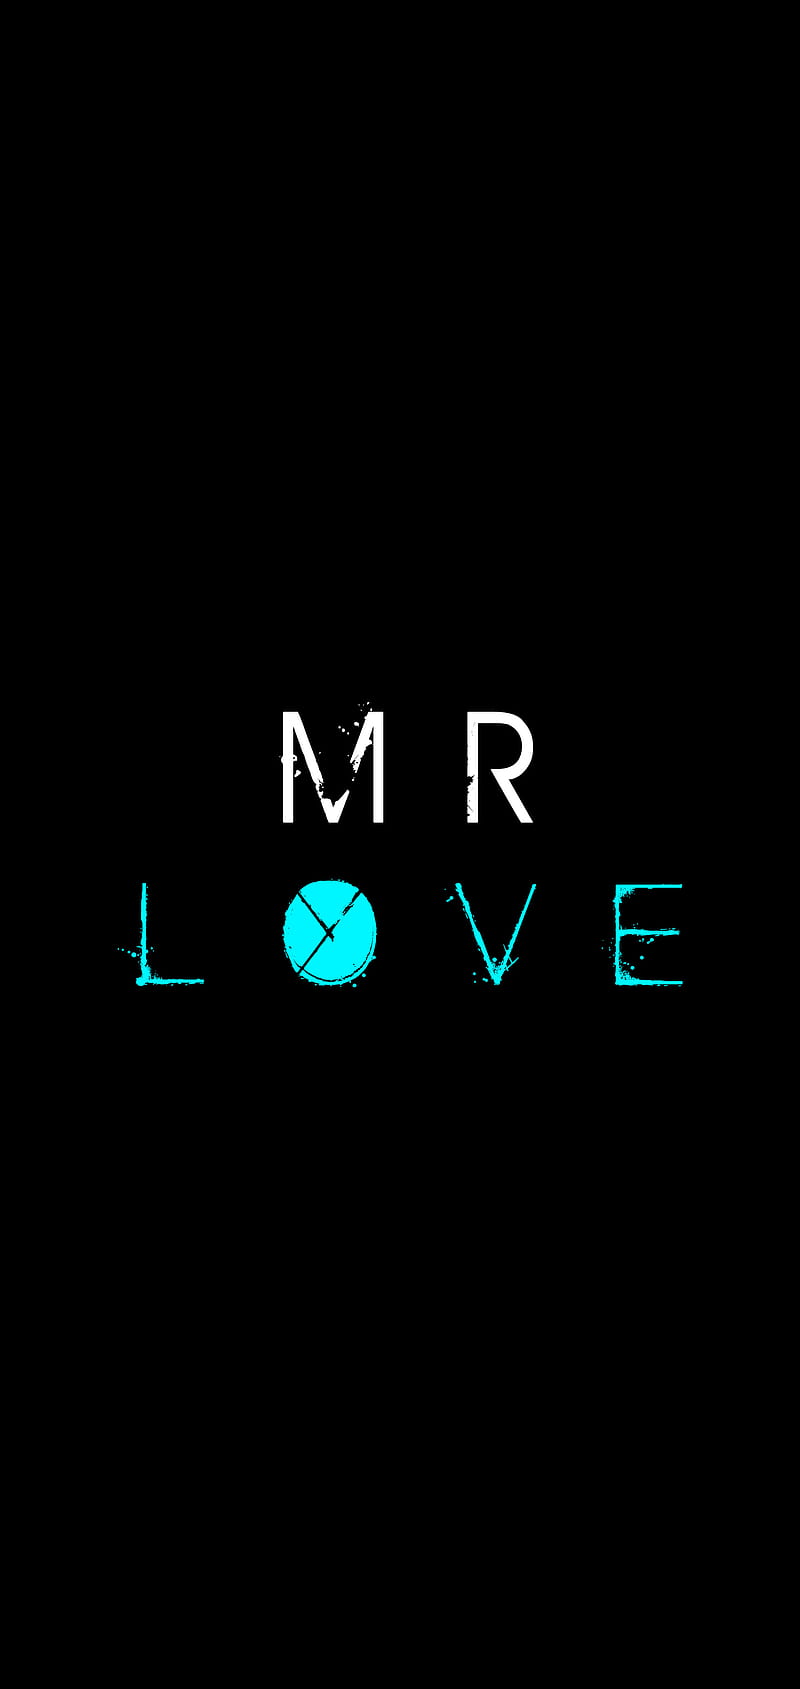 MR LOVE, android, black, emo, iphone, love, mr, red, HD phone wallpaper |  Peakpx